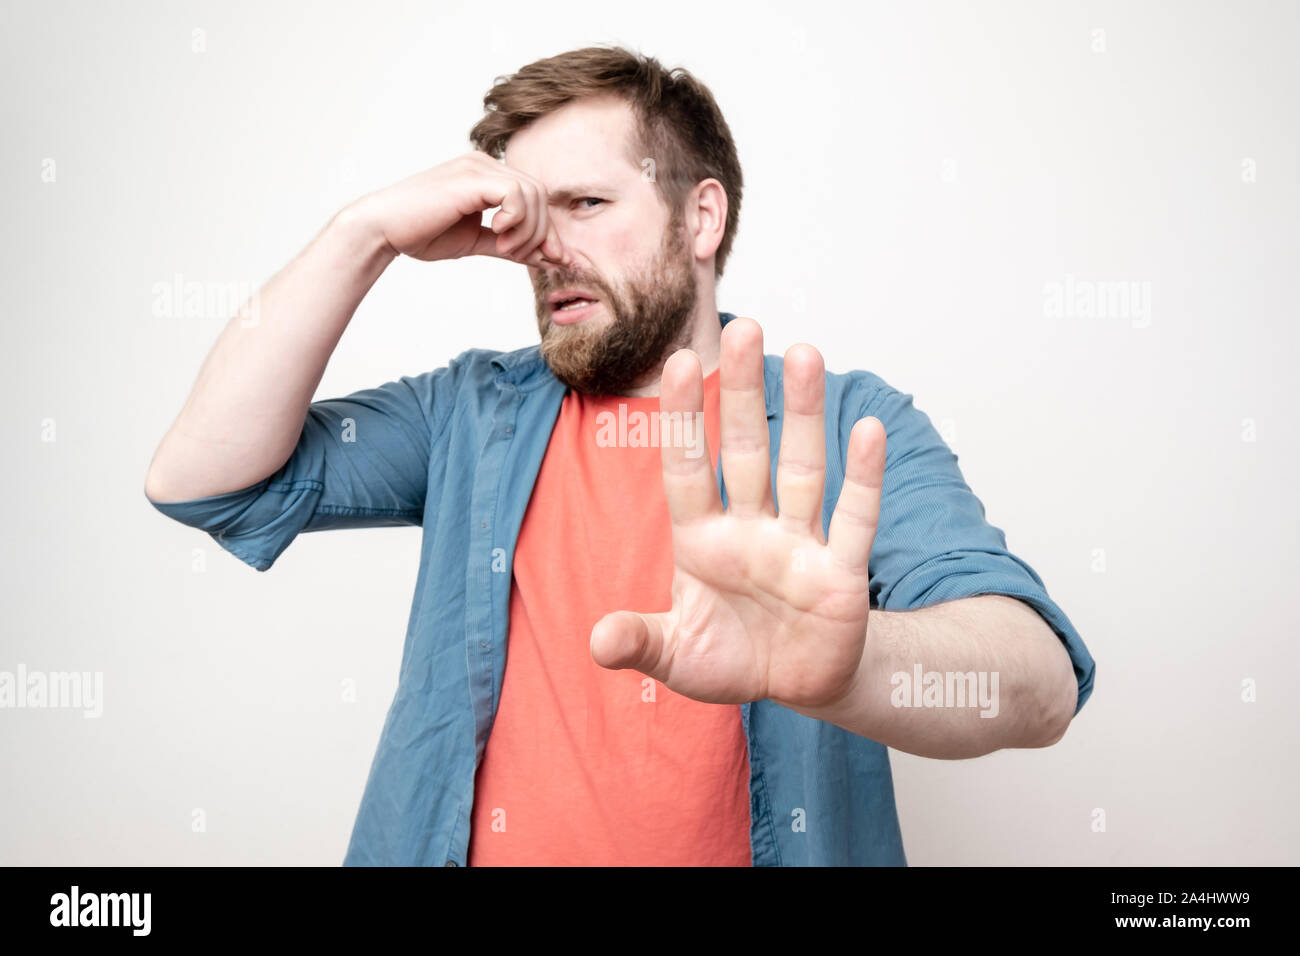 Caucasian, bearded man squeezes his nose with his hand because of an unpleasant odor and puts his palm forward, blocking the source of the stink. Isol Stock Photo